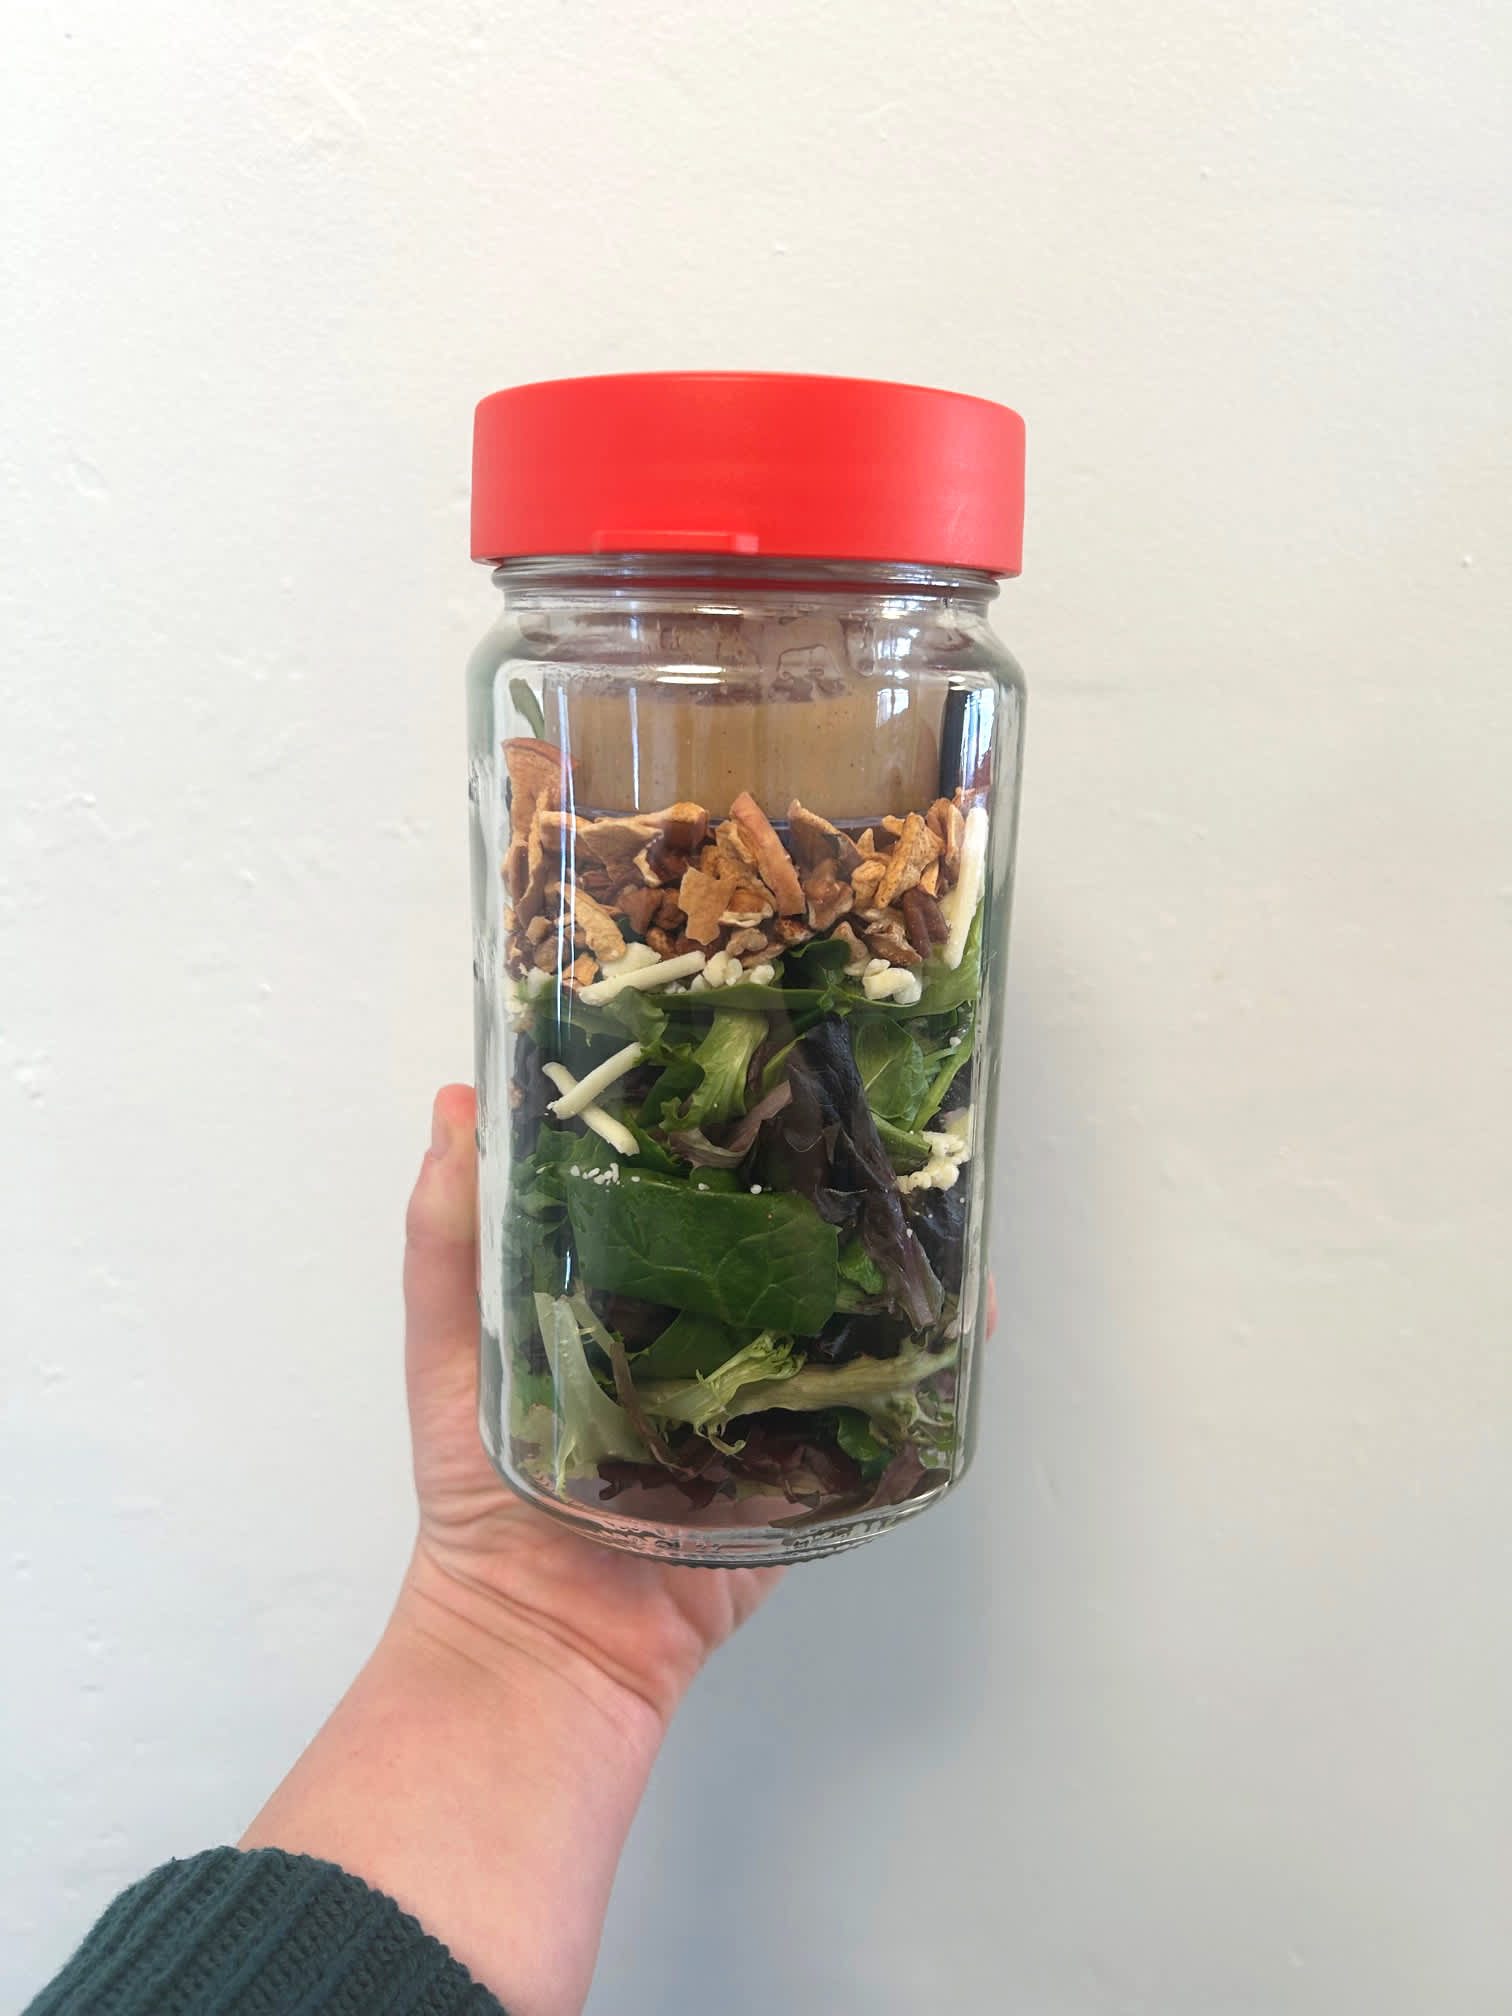 https://cdn.apartmenttherapy.info/image/upload/v1675454669/k/Edit/2023-02-the-surprising-tool-that-made-meal-prep-so-much-easier/pyrex-food-storage-container-5850.jpg